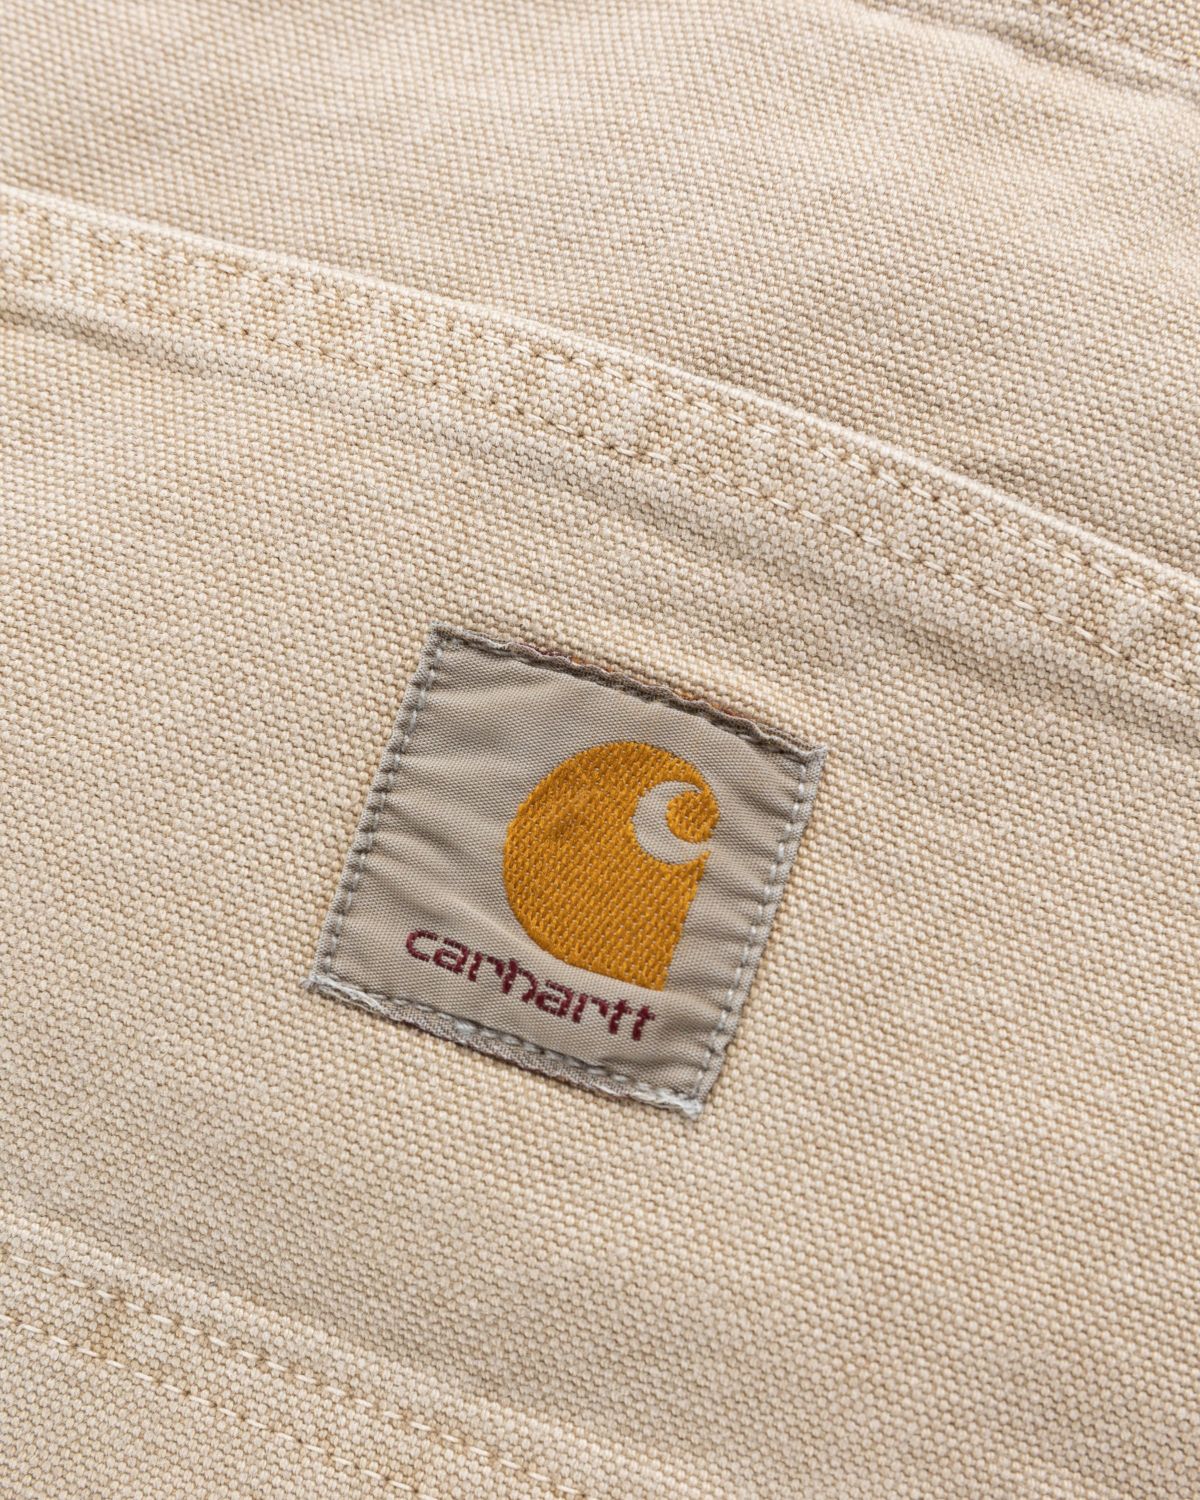 Carhartt WIP – Small Bayfield Tote Dusty Hamilton Brown Faded - Bags - Brown - Image 6